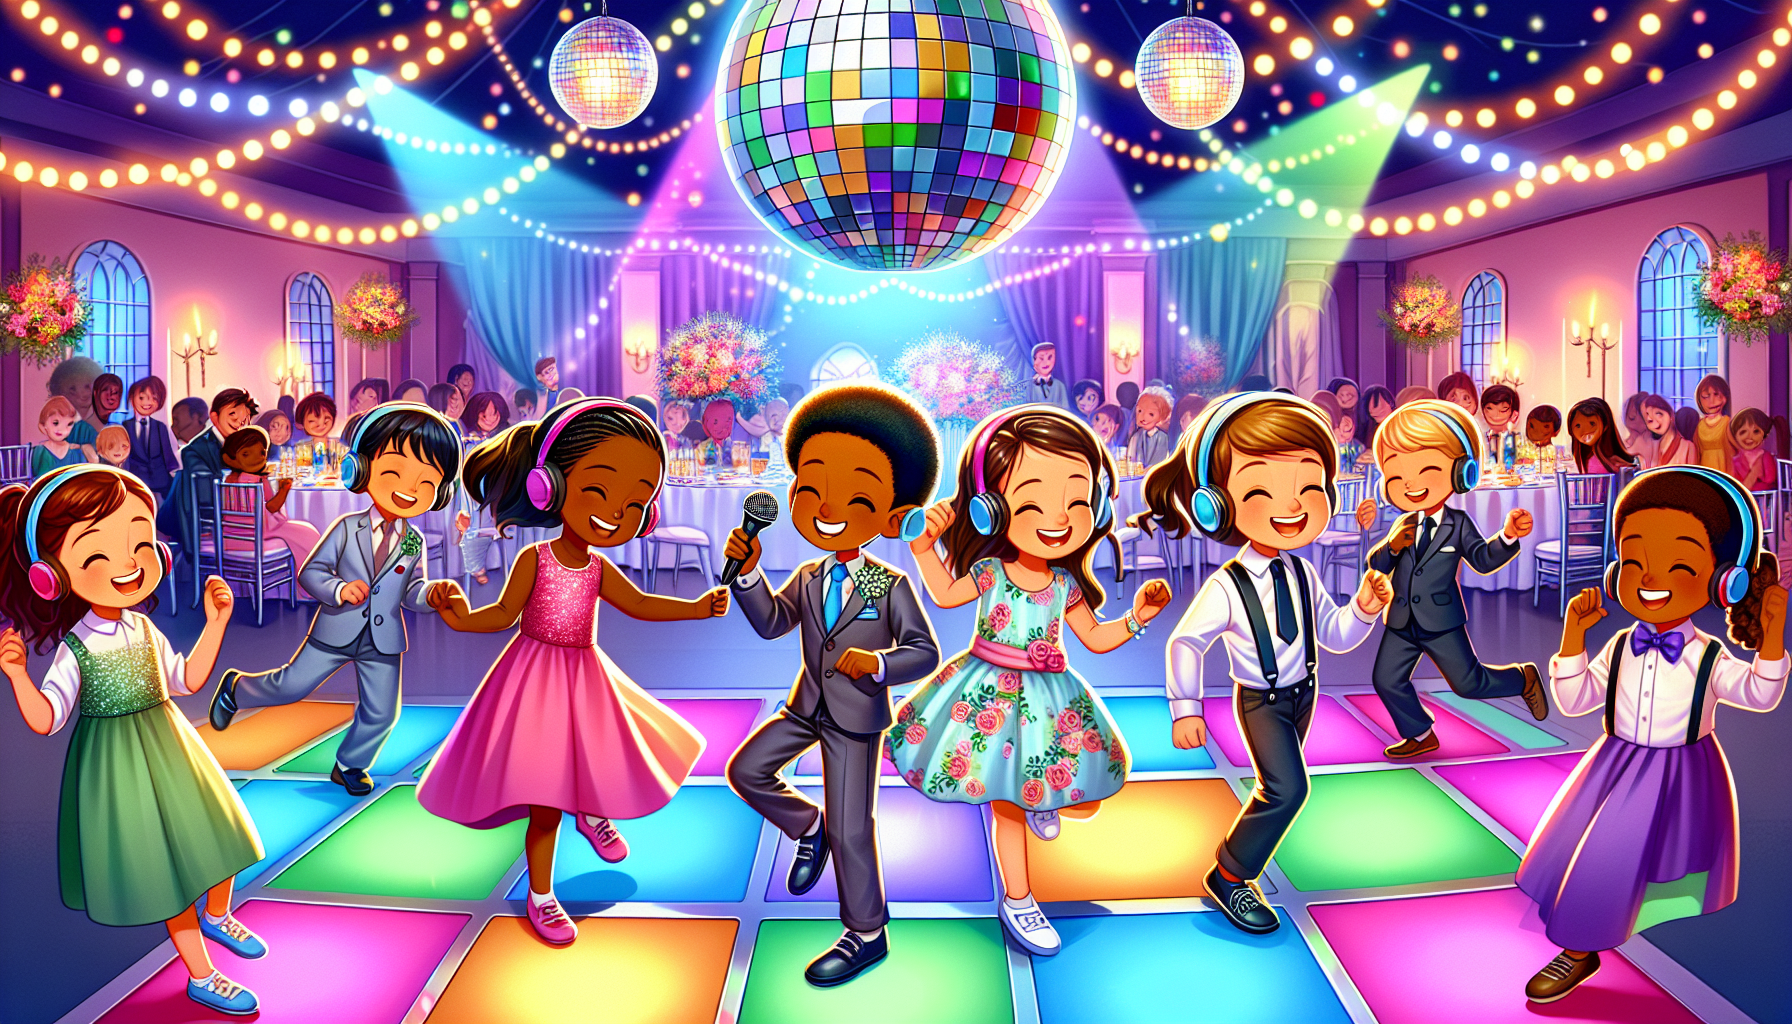 Kids dancing at a mini disco zone during a wedding